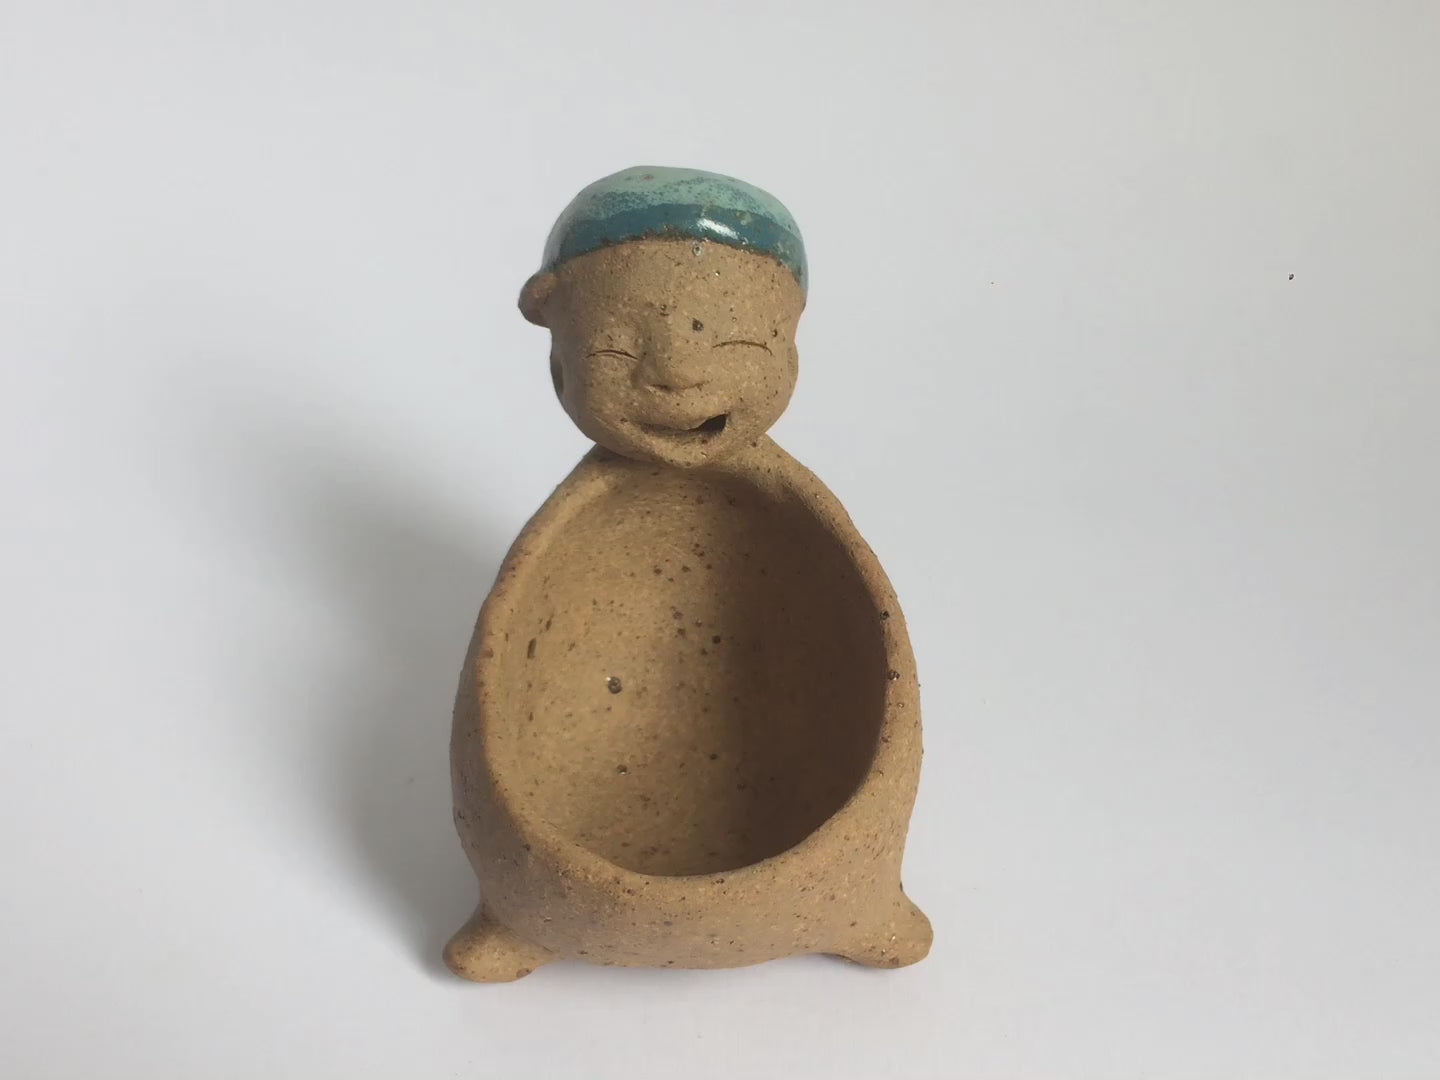 Video of brown unglazed figurative ceramic object with blue glazed accent on top